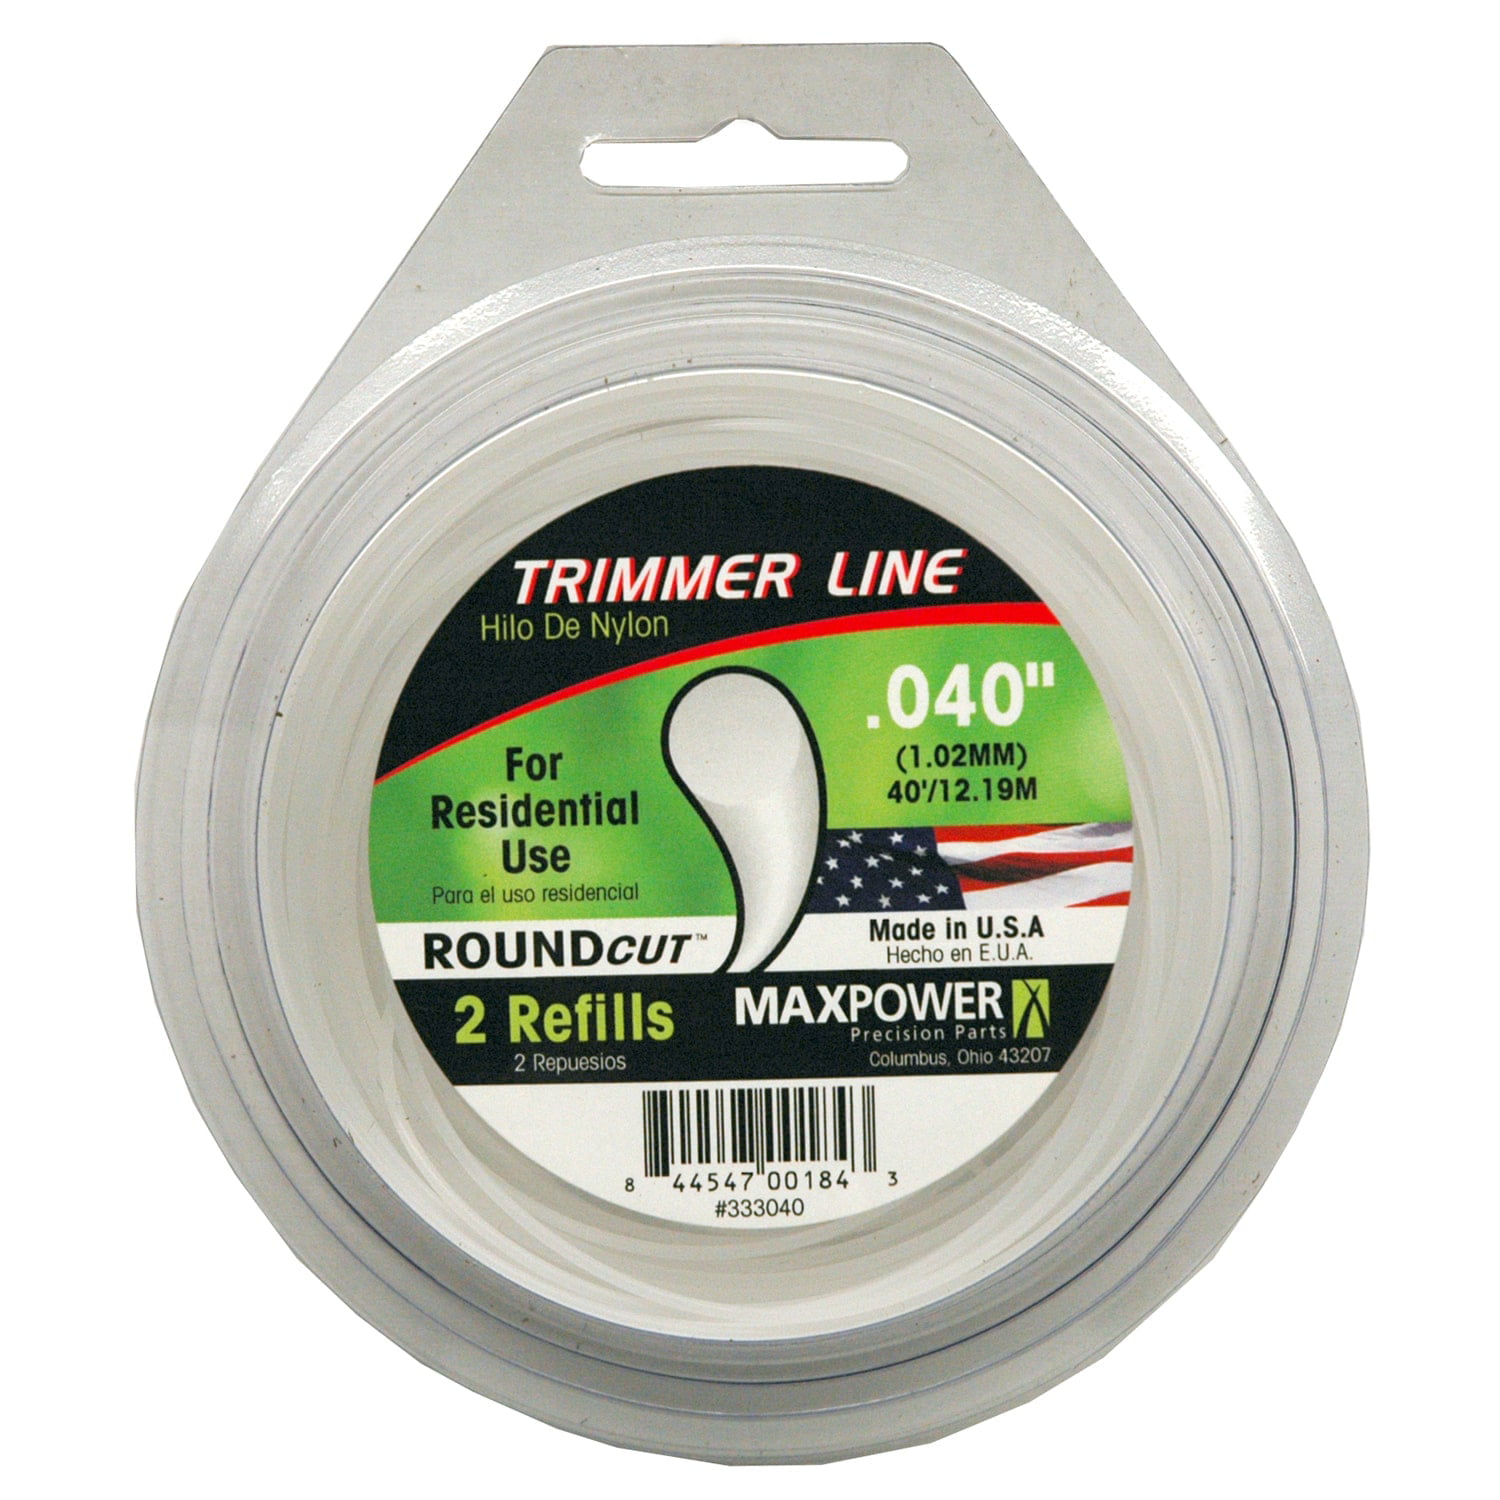 maxpower trimmer line